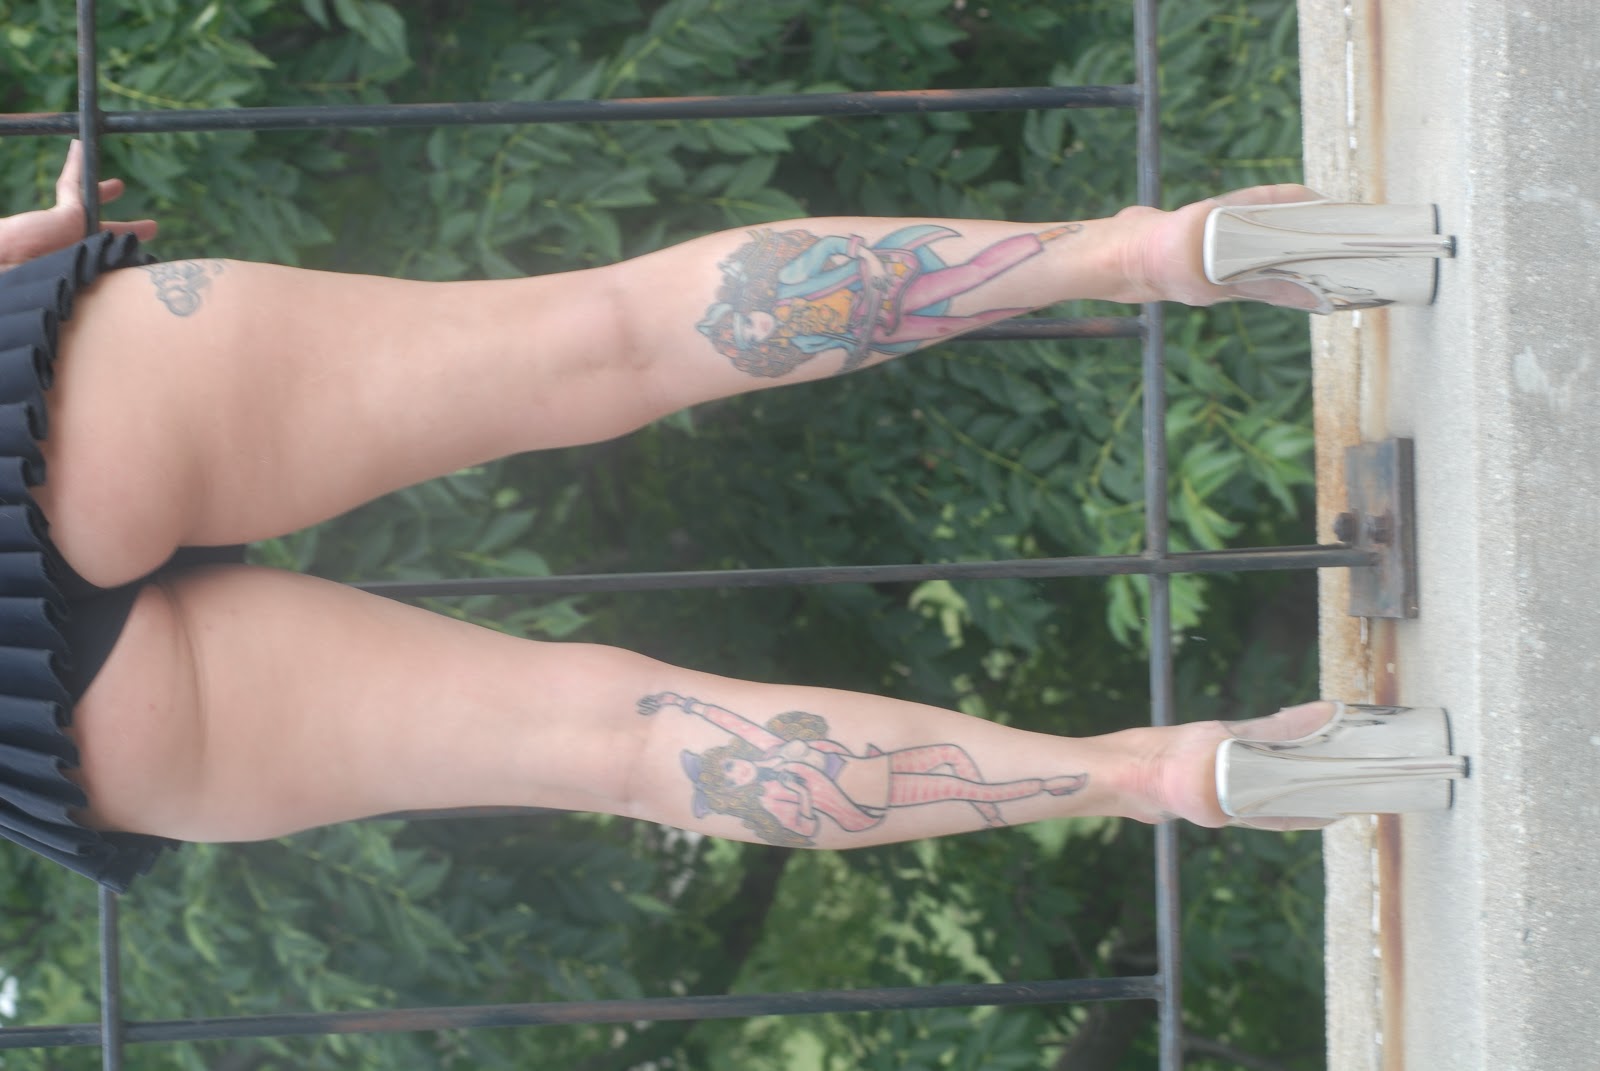 The Girl With Leg tattoos 16